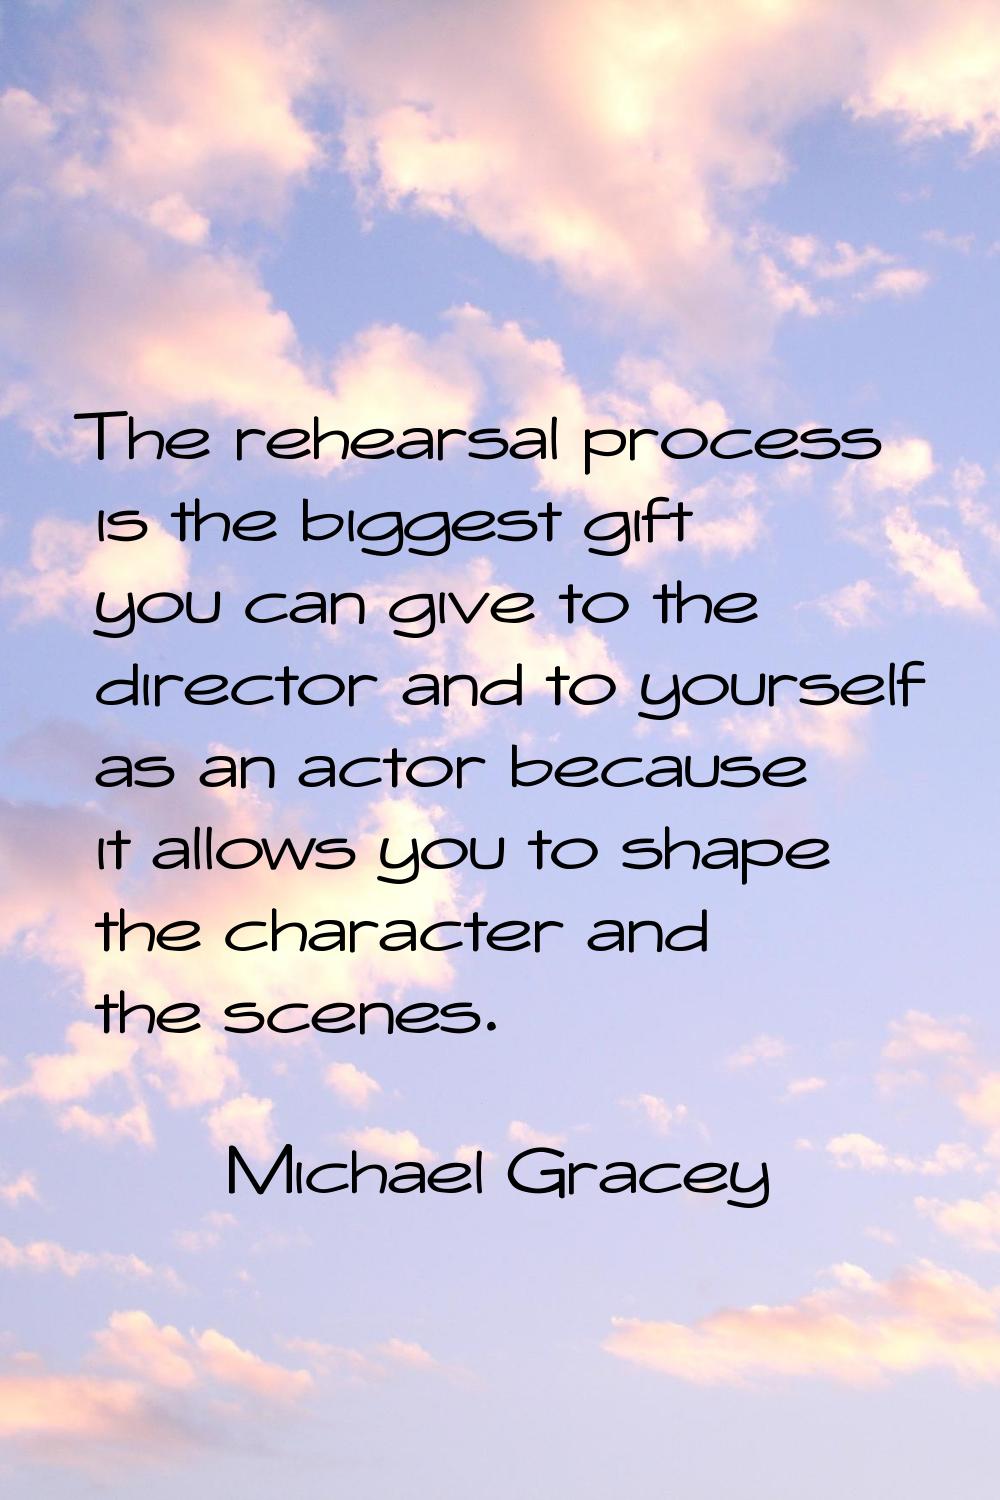 The rehearsal process is the biggest gift you can give to the director and to yourself as an actor 